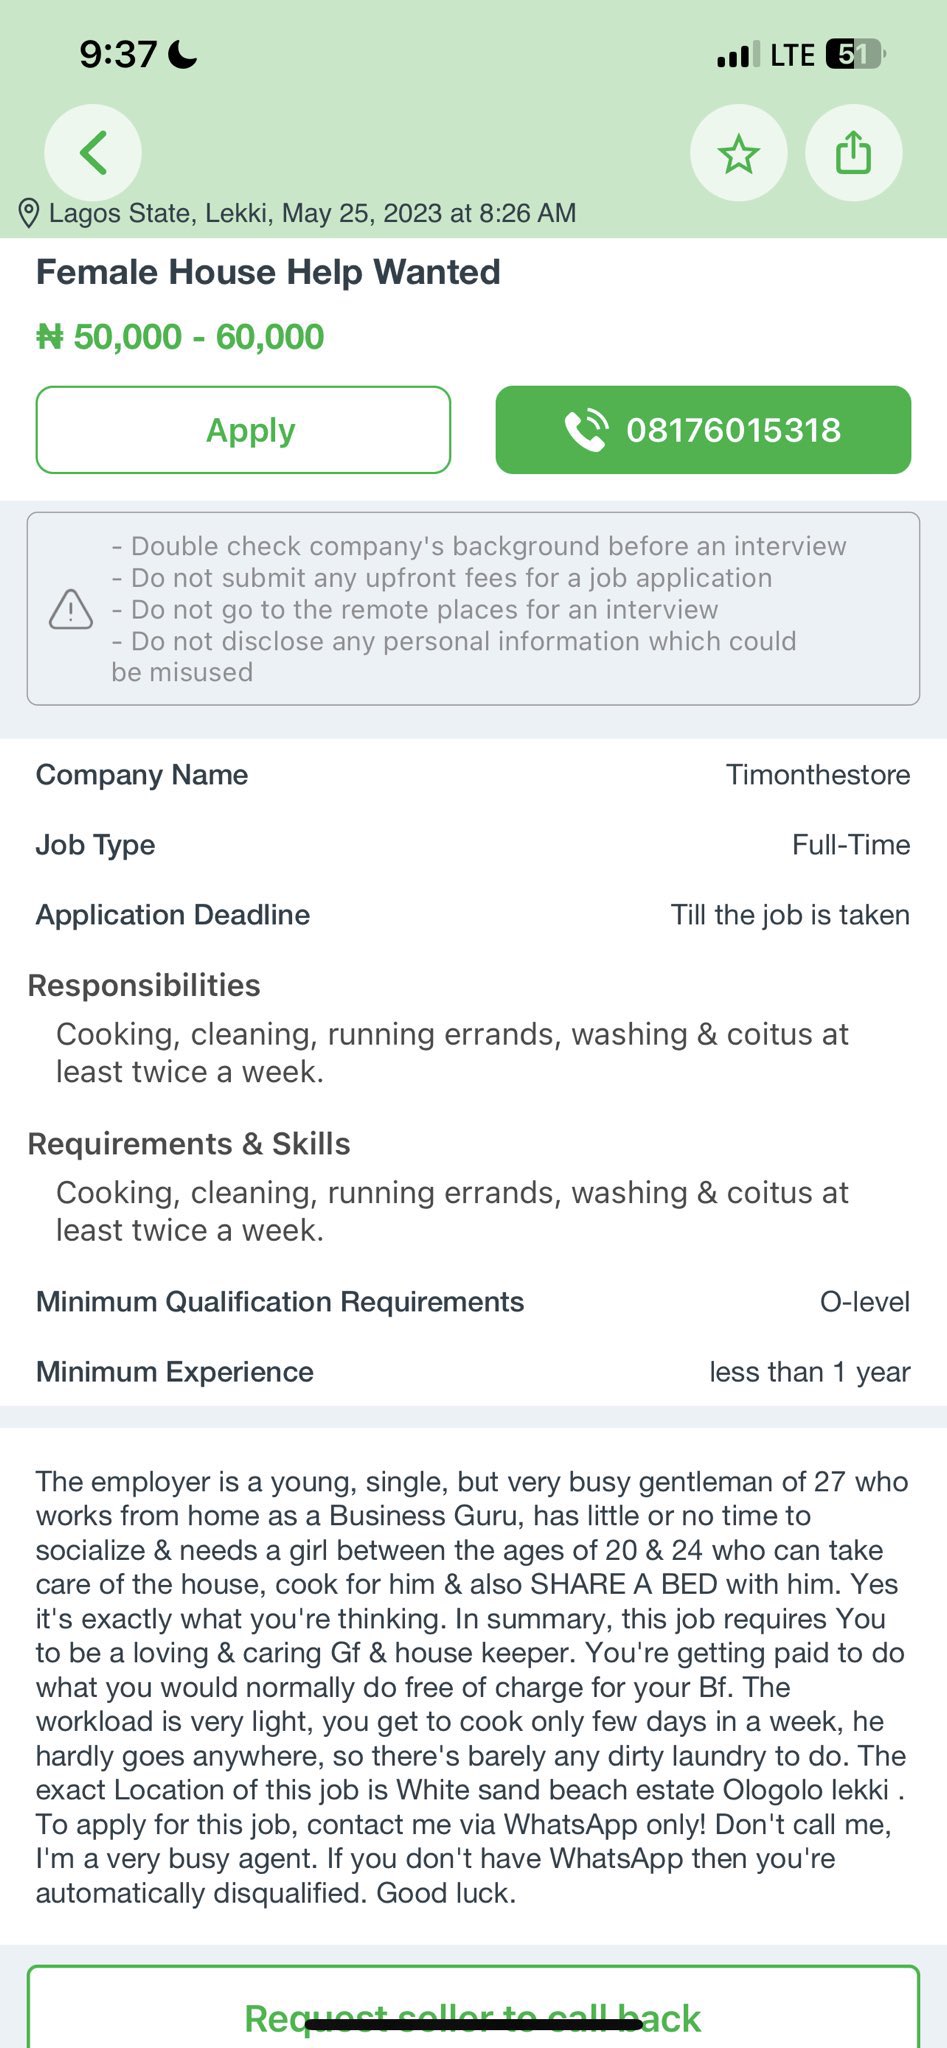 "She must clean and grace my bed"- Rich Nigerian man, 27, displays job vacancy, netizens rant